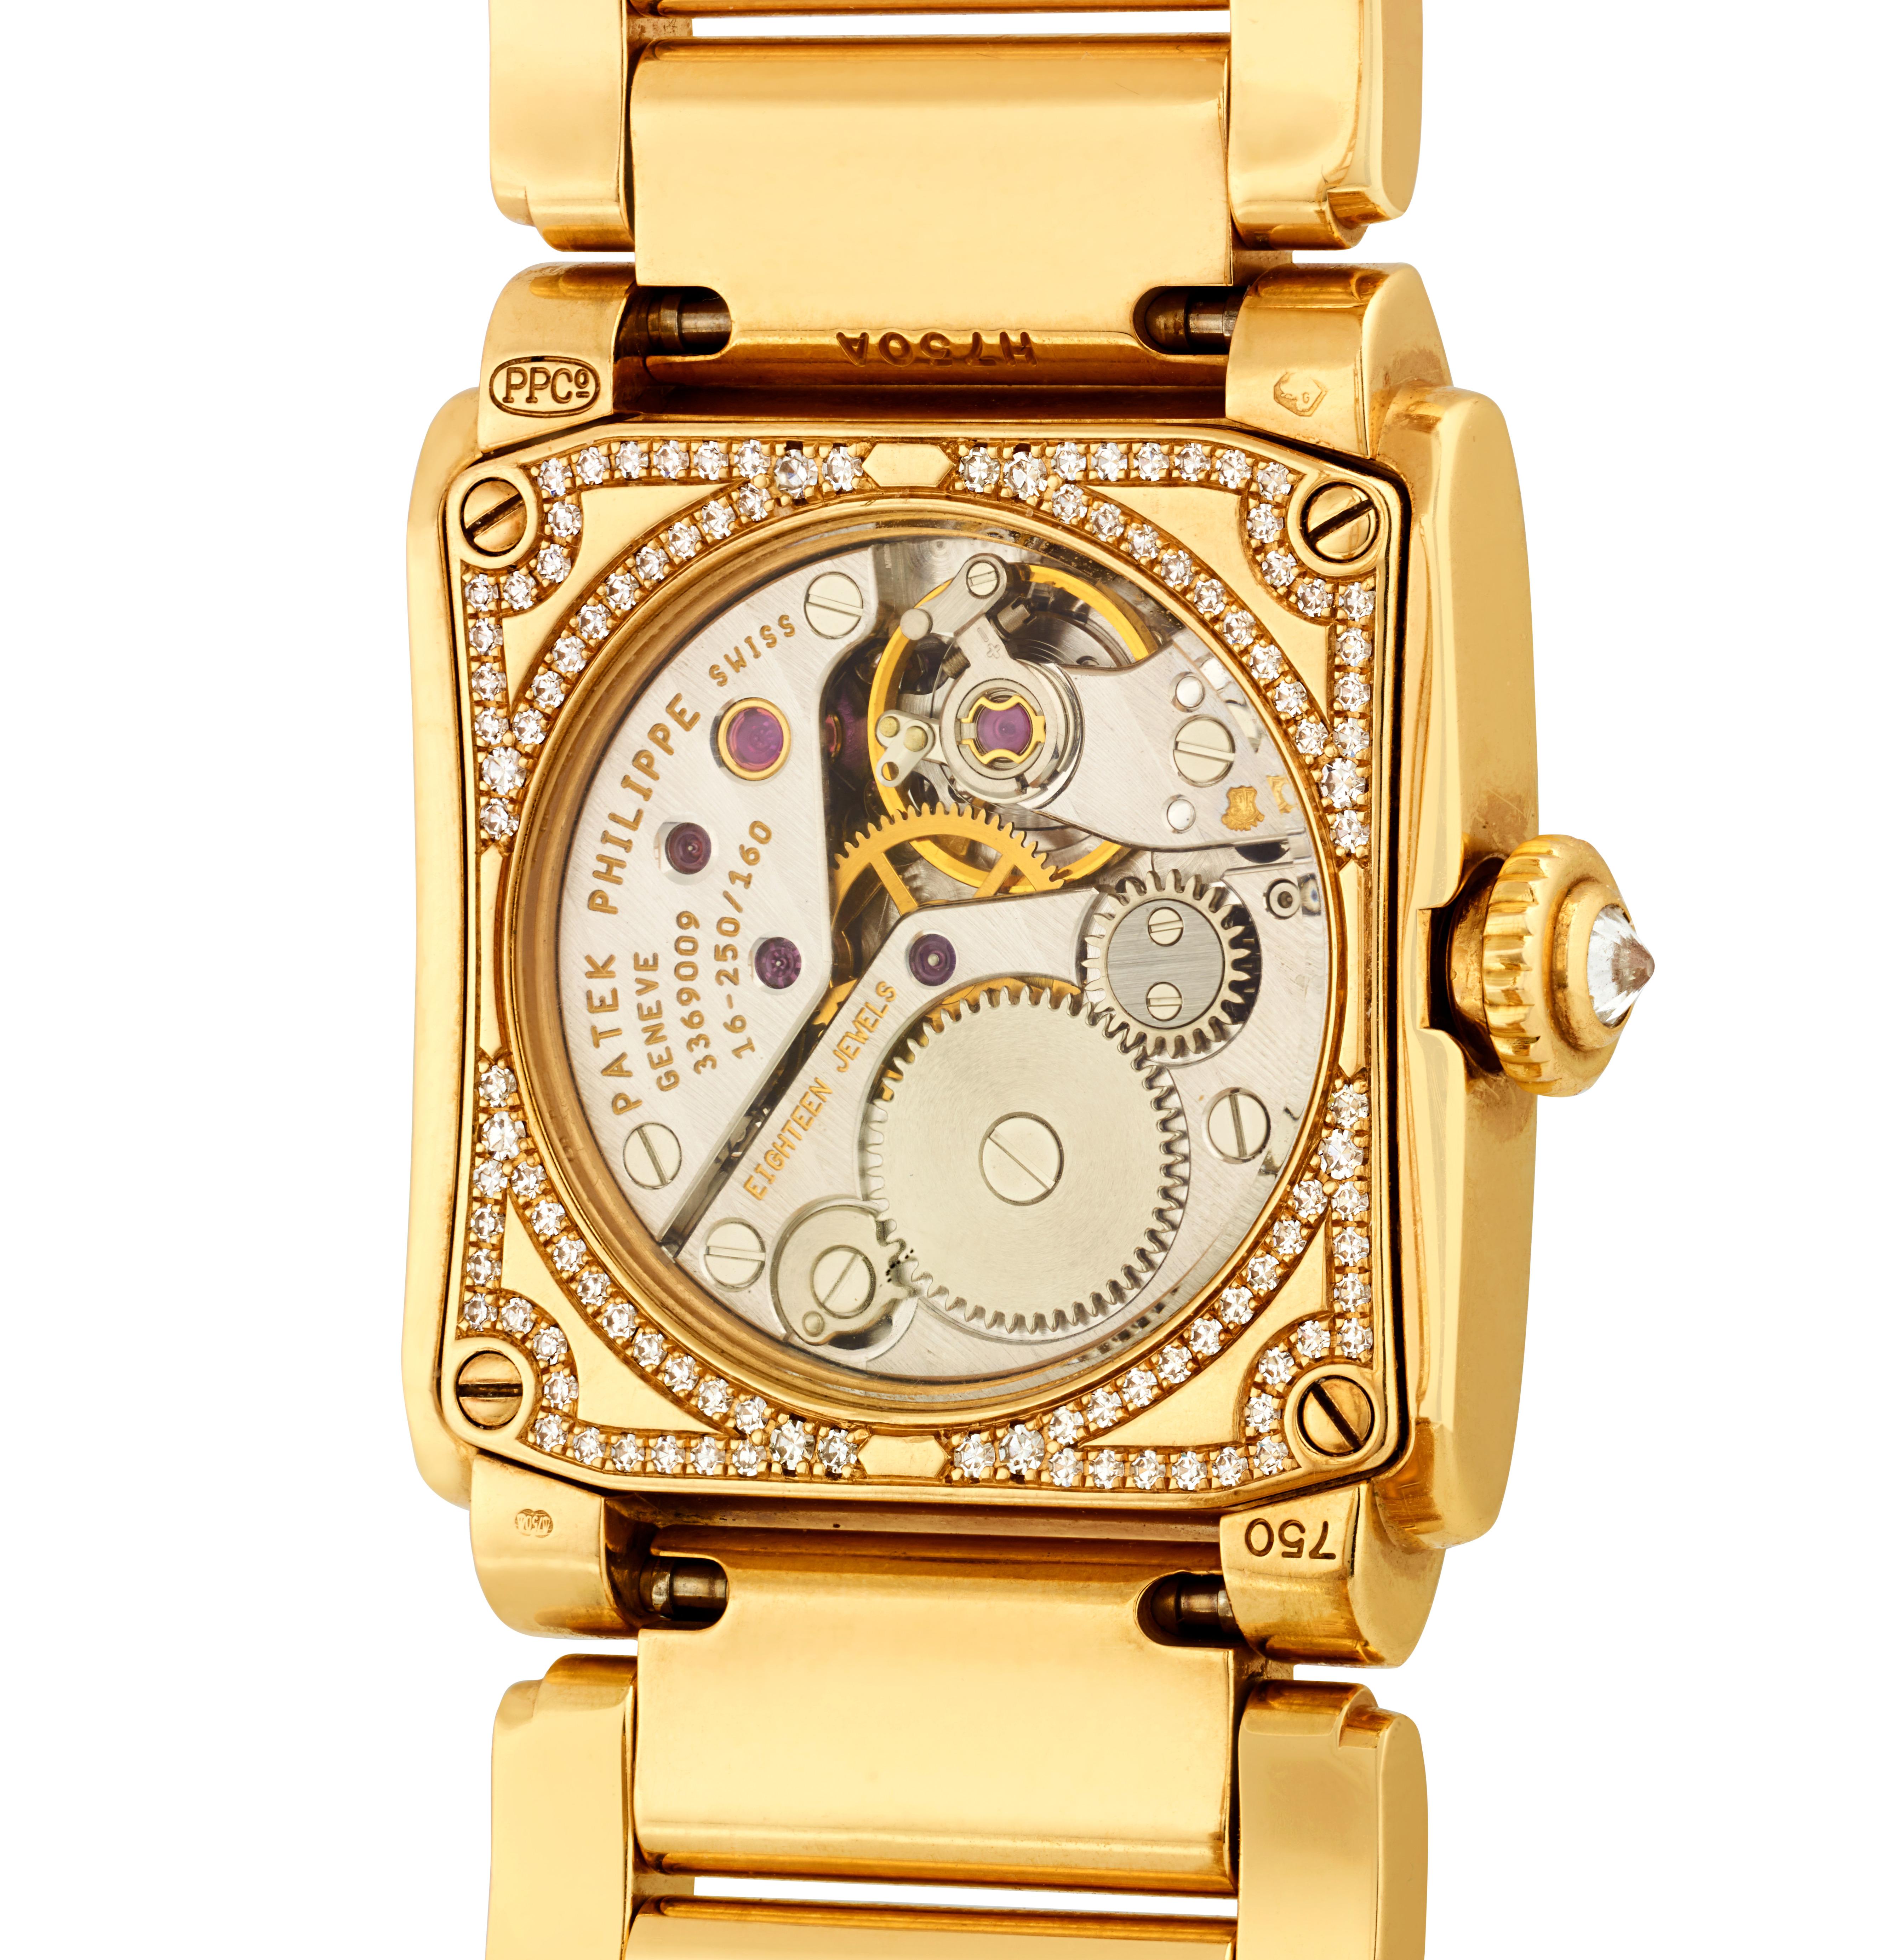 This Patek Philippe Twenty~4 ladies' watch represents the apex of precision and prestige and is one of the rarest watches on the market. Patek Philippe produces a significantly smaller number of women's watches compared to men's, and among these,